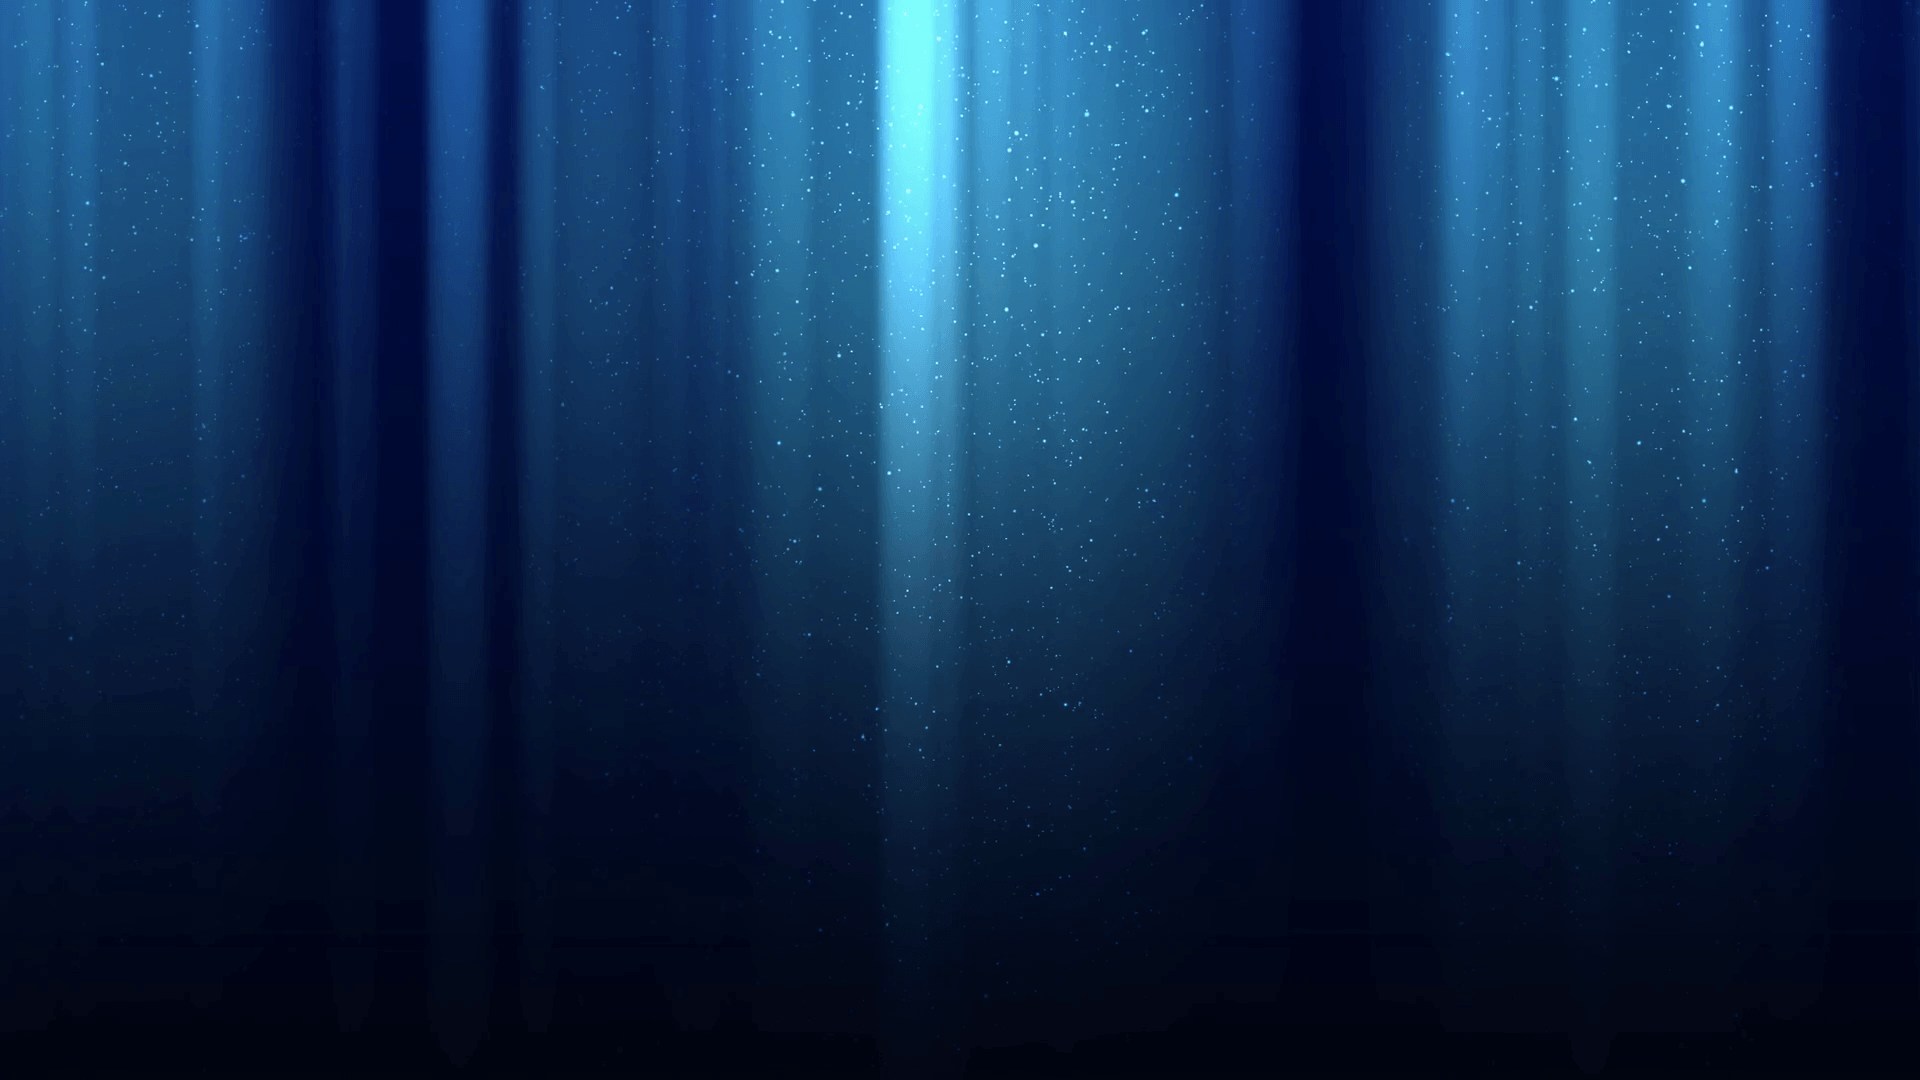 Dark blue abstract background with rays of light and specks